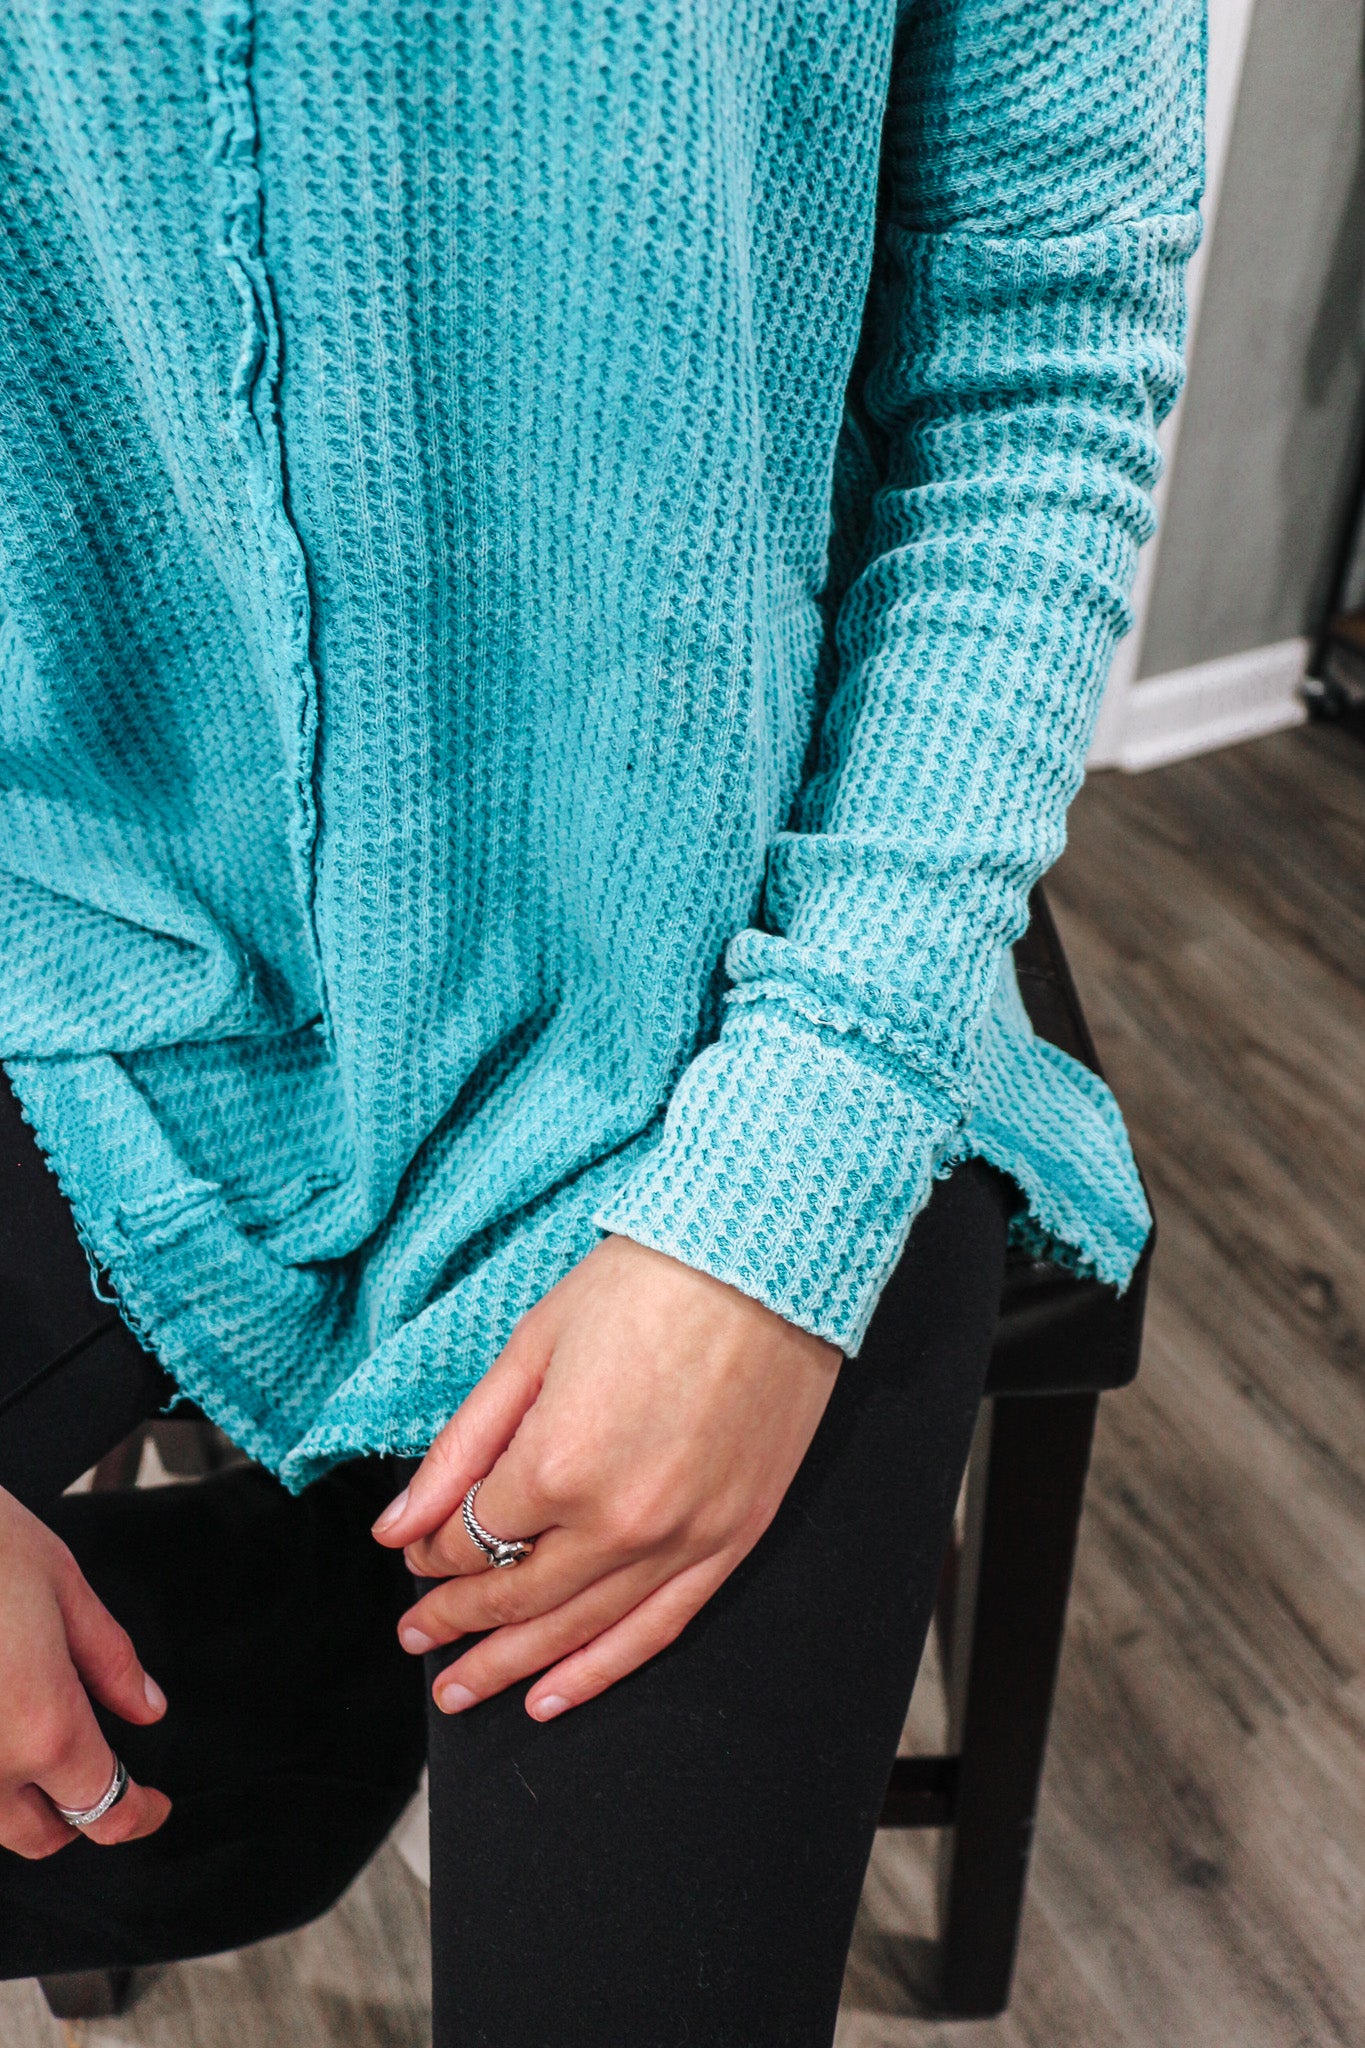 What A Treat Light Teal Waffle Knit Top